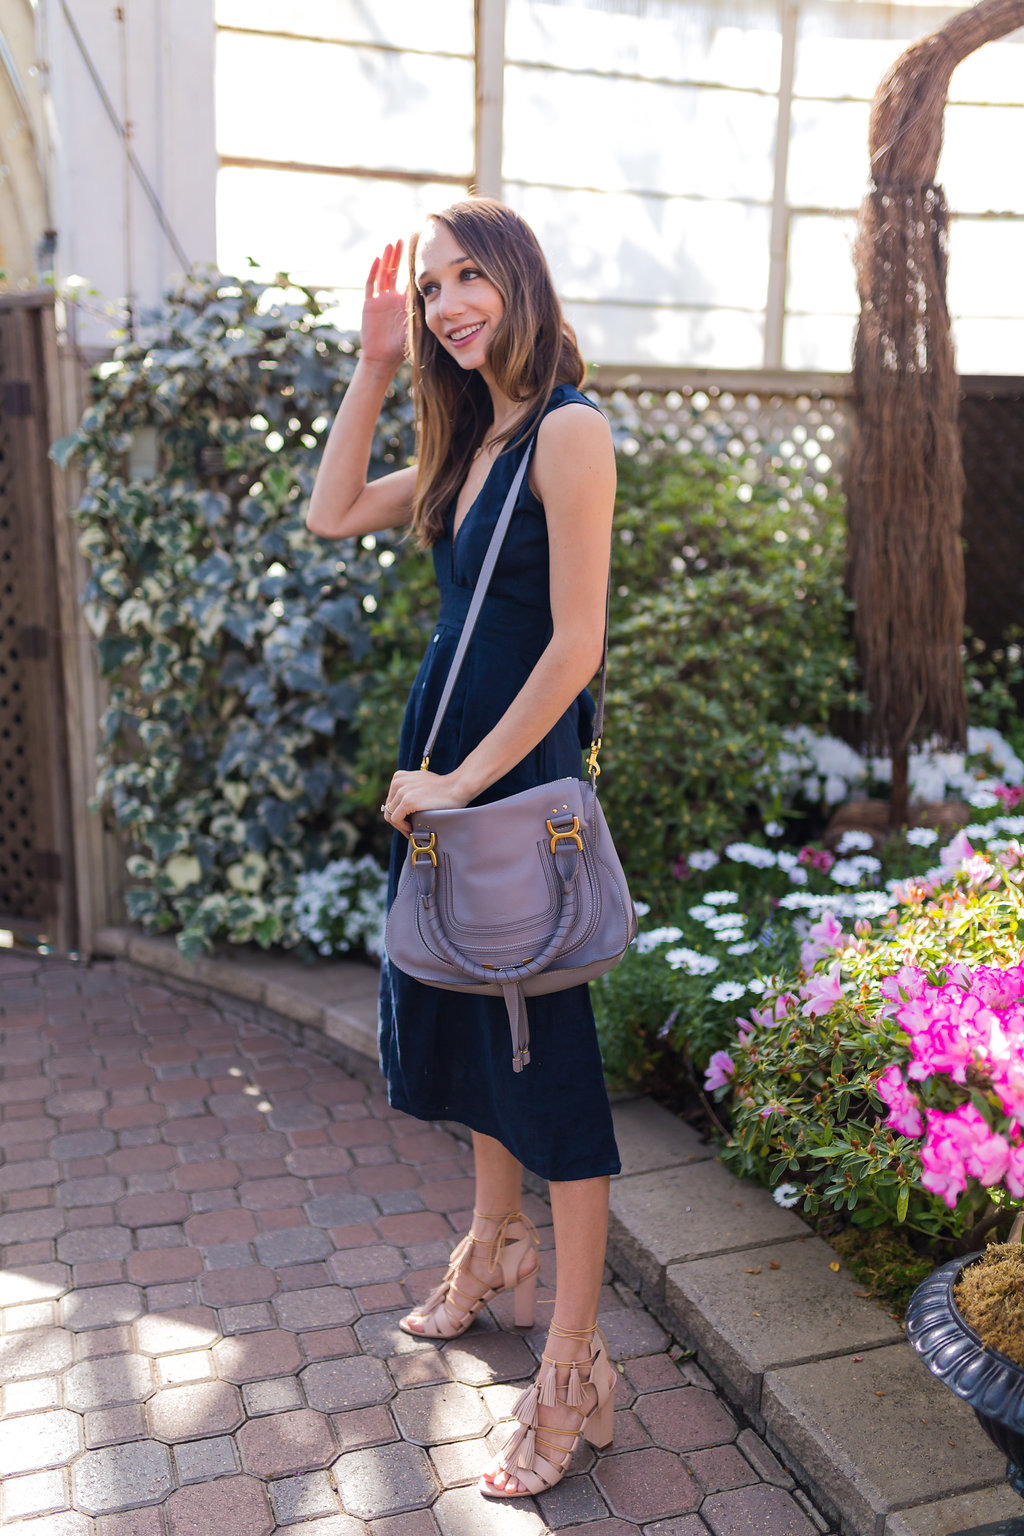 The Fox & She is sharing tips on how to wear a midi dress